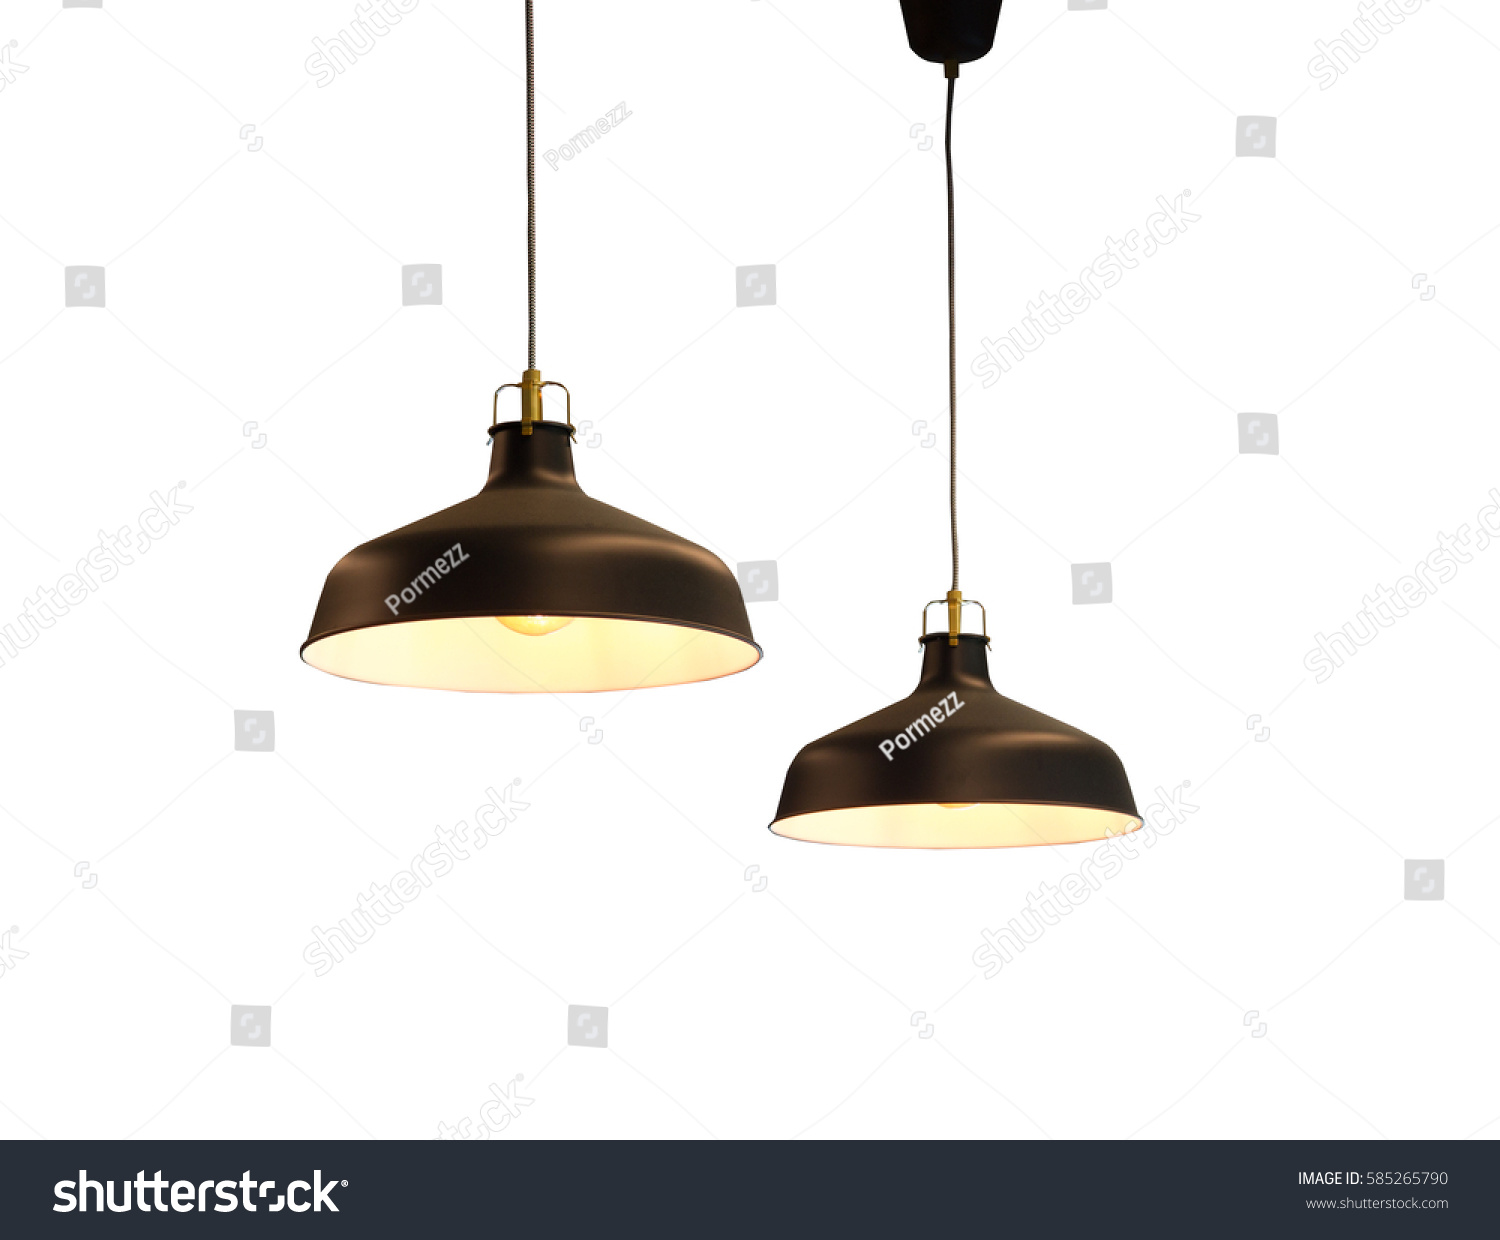 Black decorative lamp hanging from the ceiling.modern lamp isolated on white background #585265790